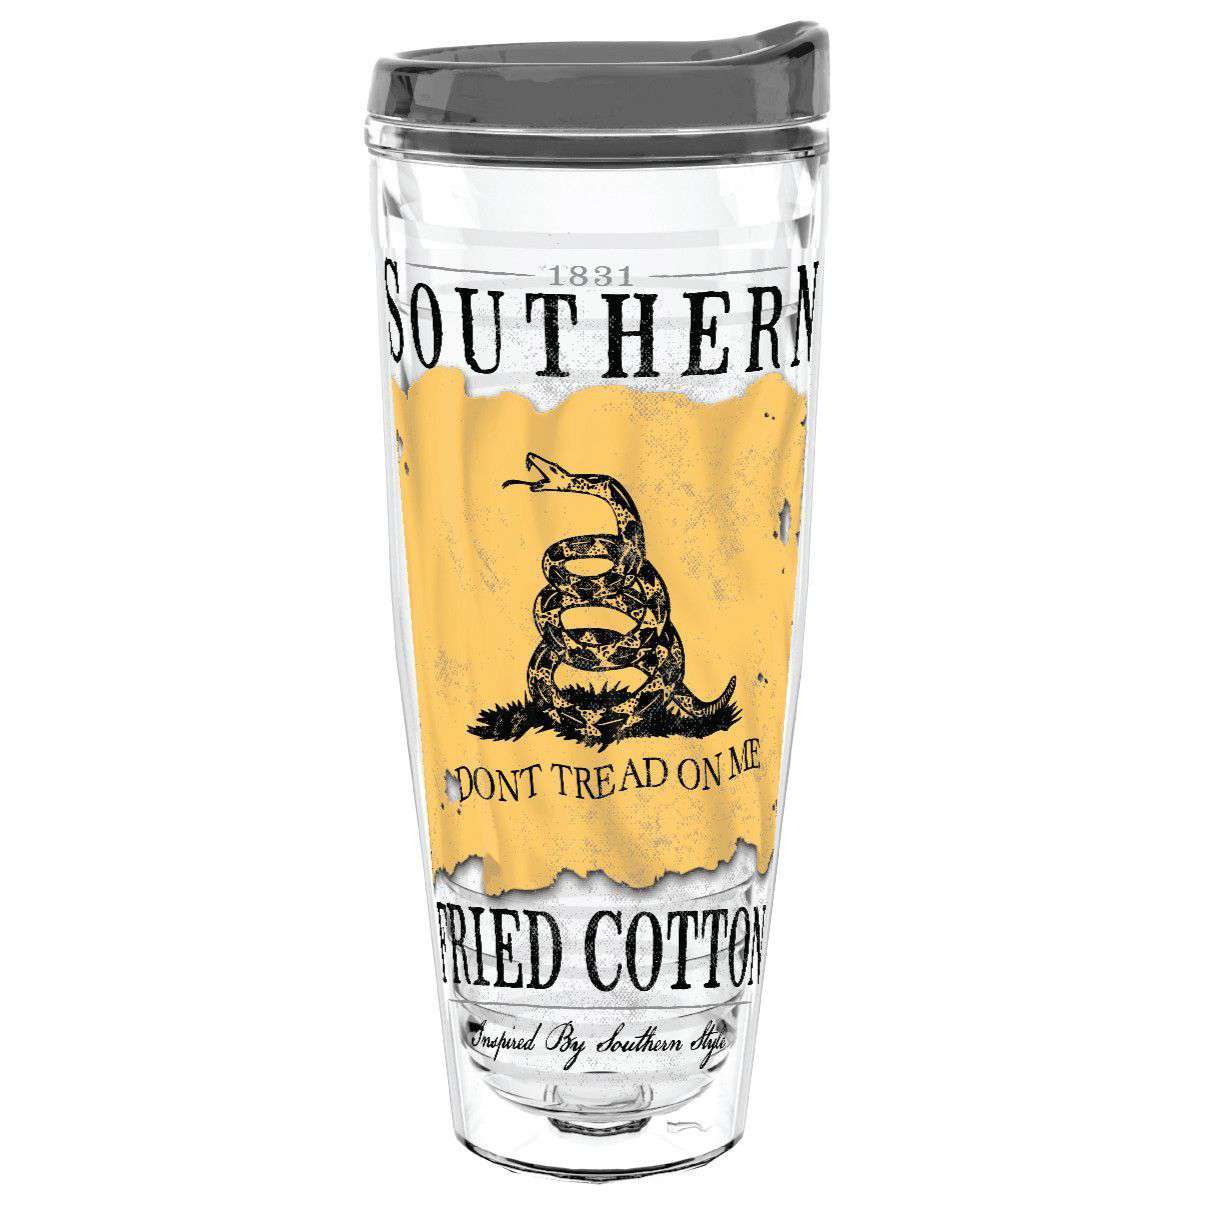 Don't Tread on Me 26oz Tumbler by Southern Fried Cotton - Country Club Prep